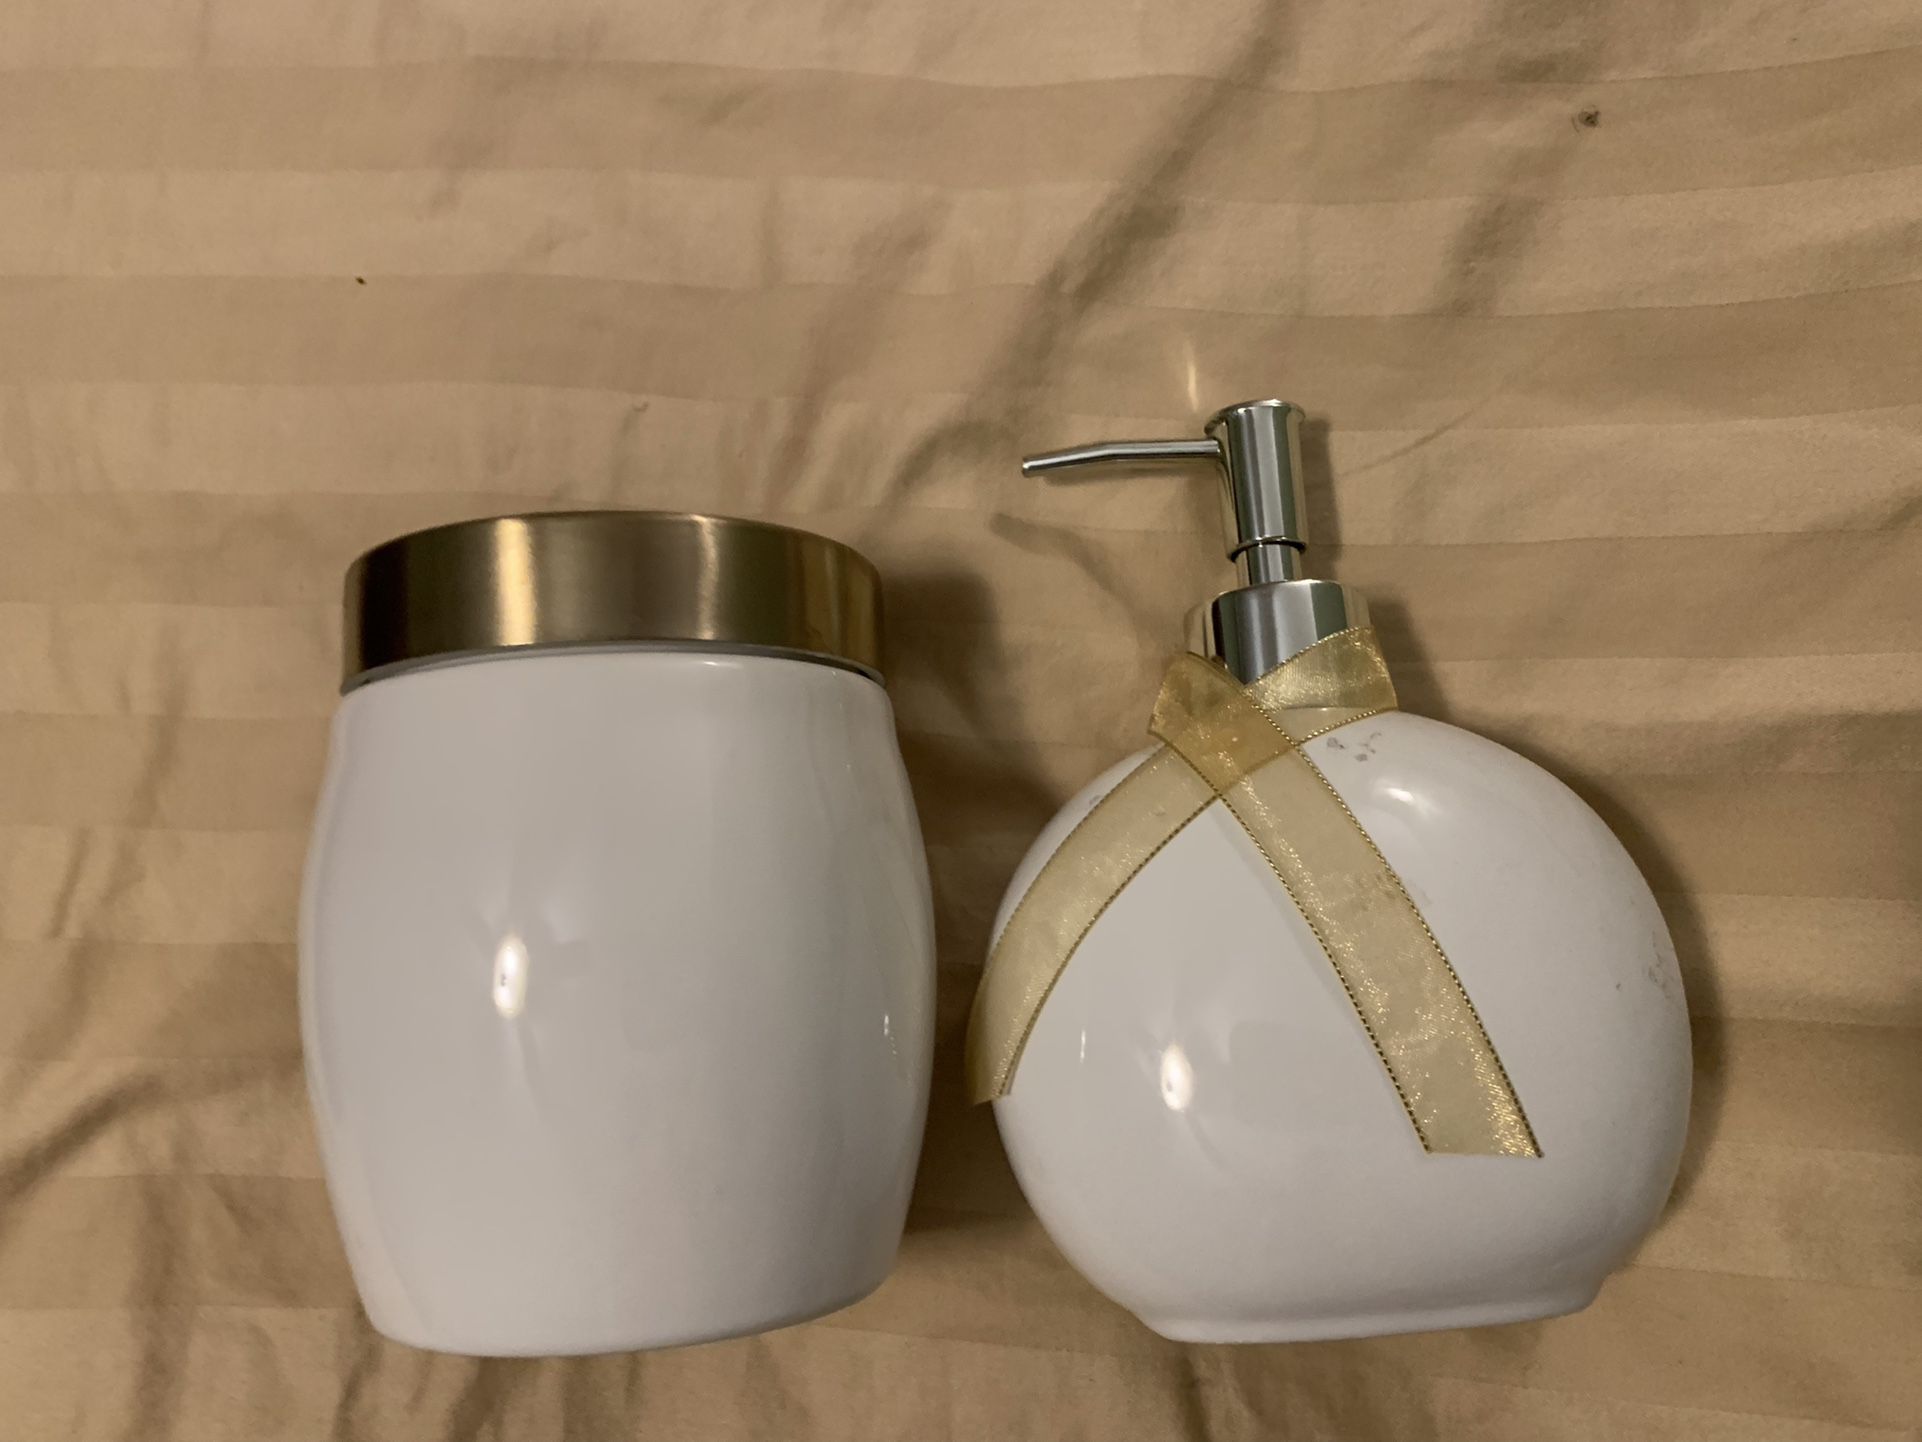 Matching Soap Bottle And Storage Jar